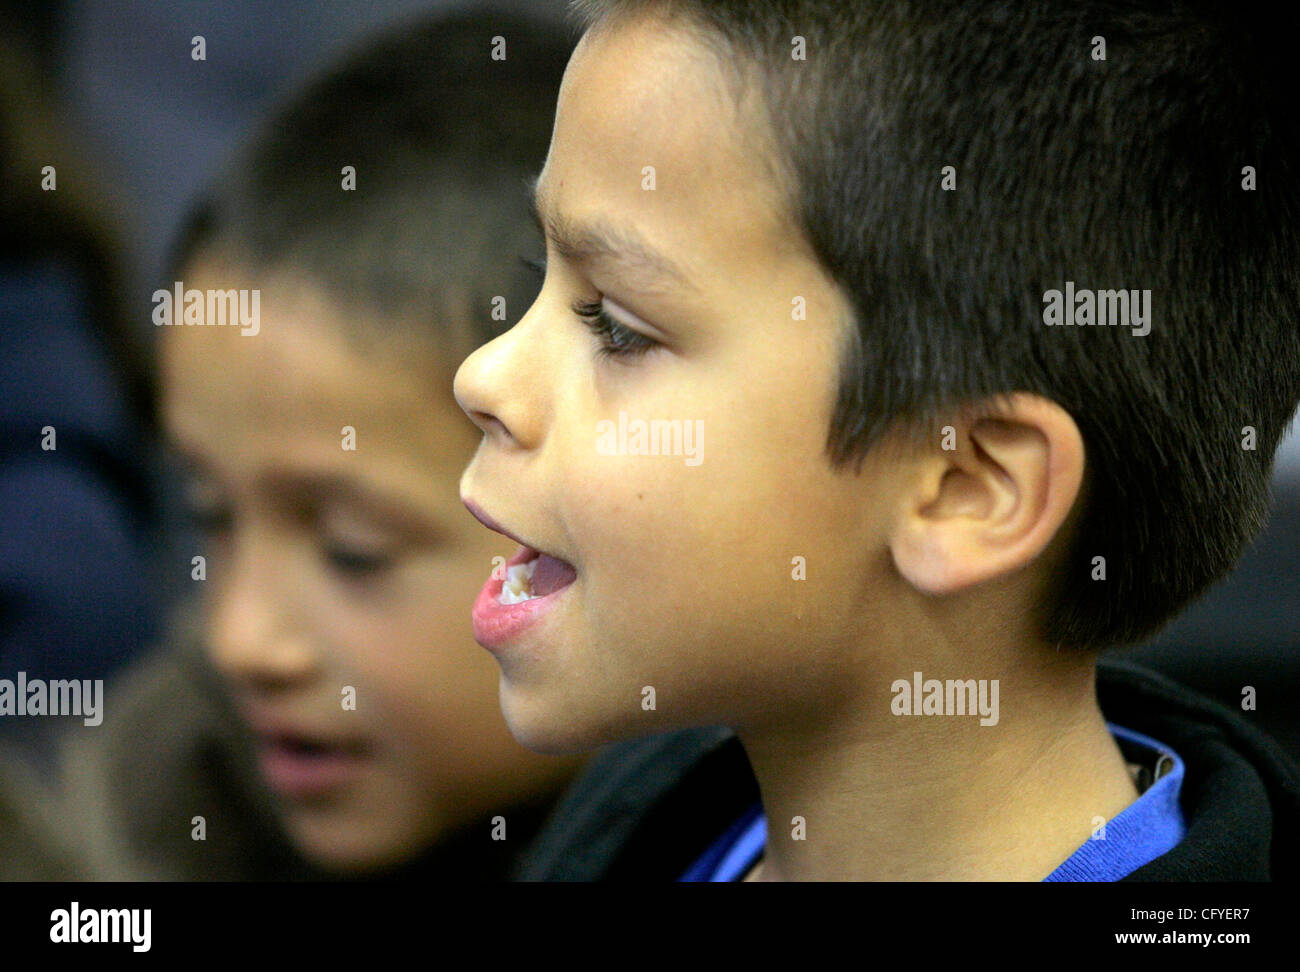 May 16, 2007, Oceanside, California At San Luis Rey Elementary School first grader CYRUS GREENE sings along with a song being played on the guitar by teacher JENNY REES Mandatory Credit: photo by Charlie Neuman/San Diego Union-Tribune/Zuma Press. copyright 2007 San Diego Union-Tribune Stock Photo